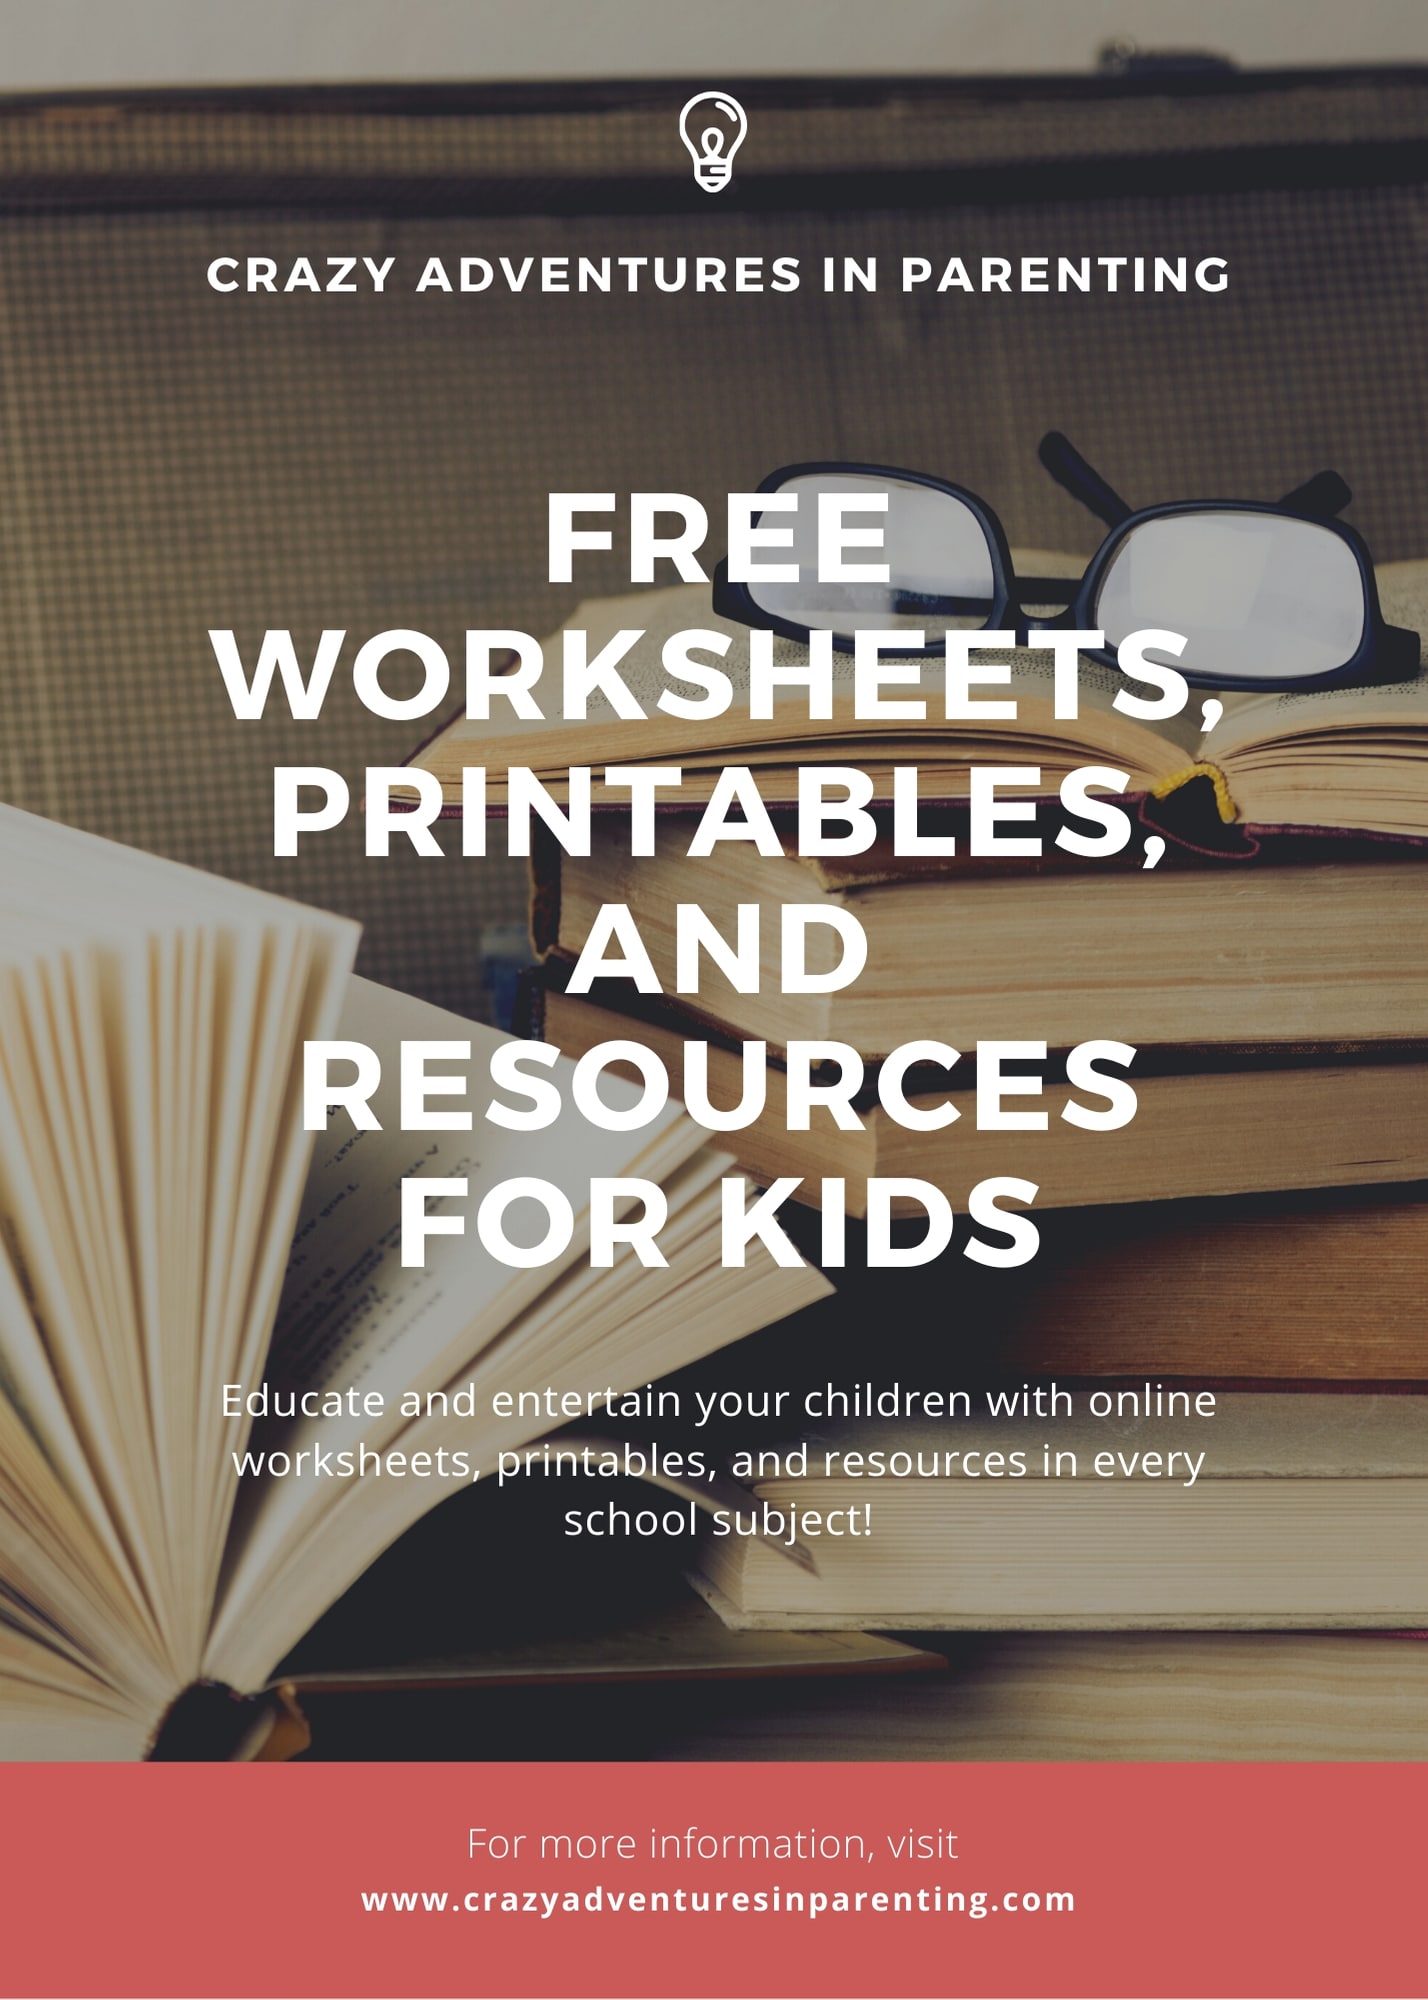 Free Worksheets Printables and Resources for Kids